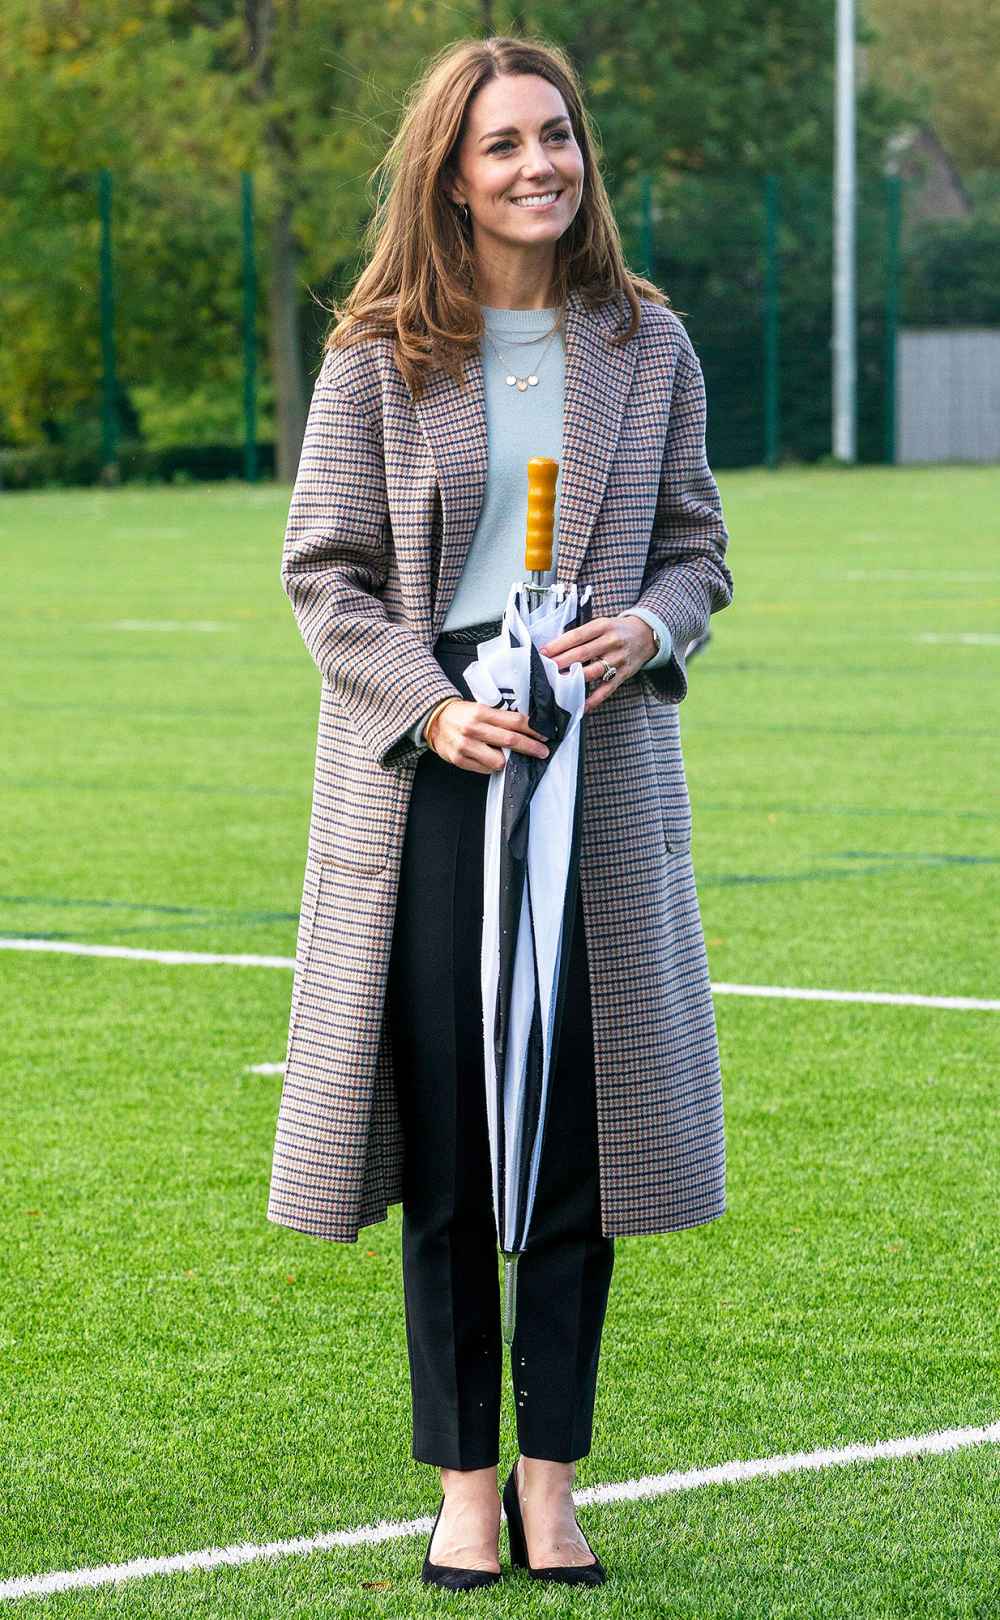 Duchess Kate Visiting The University Of Derbvy In A Plaid Coat And Carrying An Umbrella